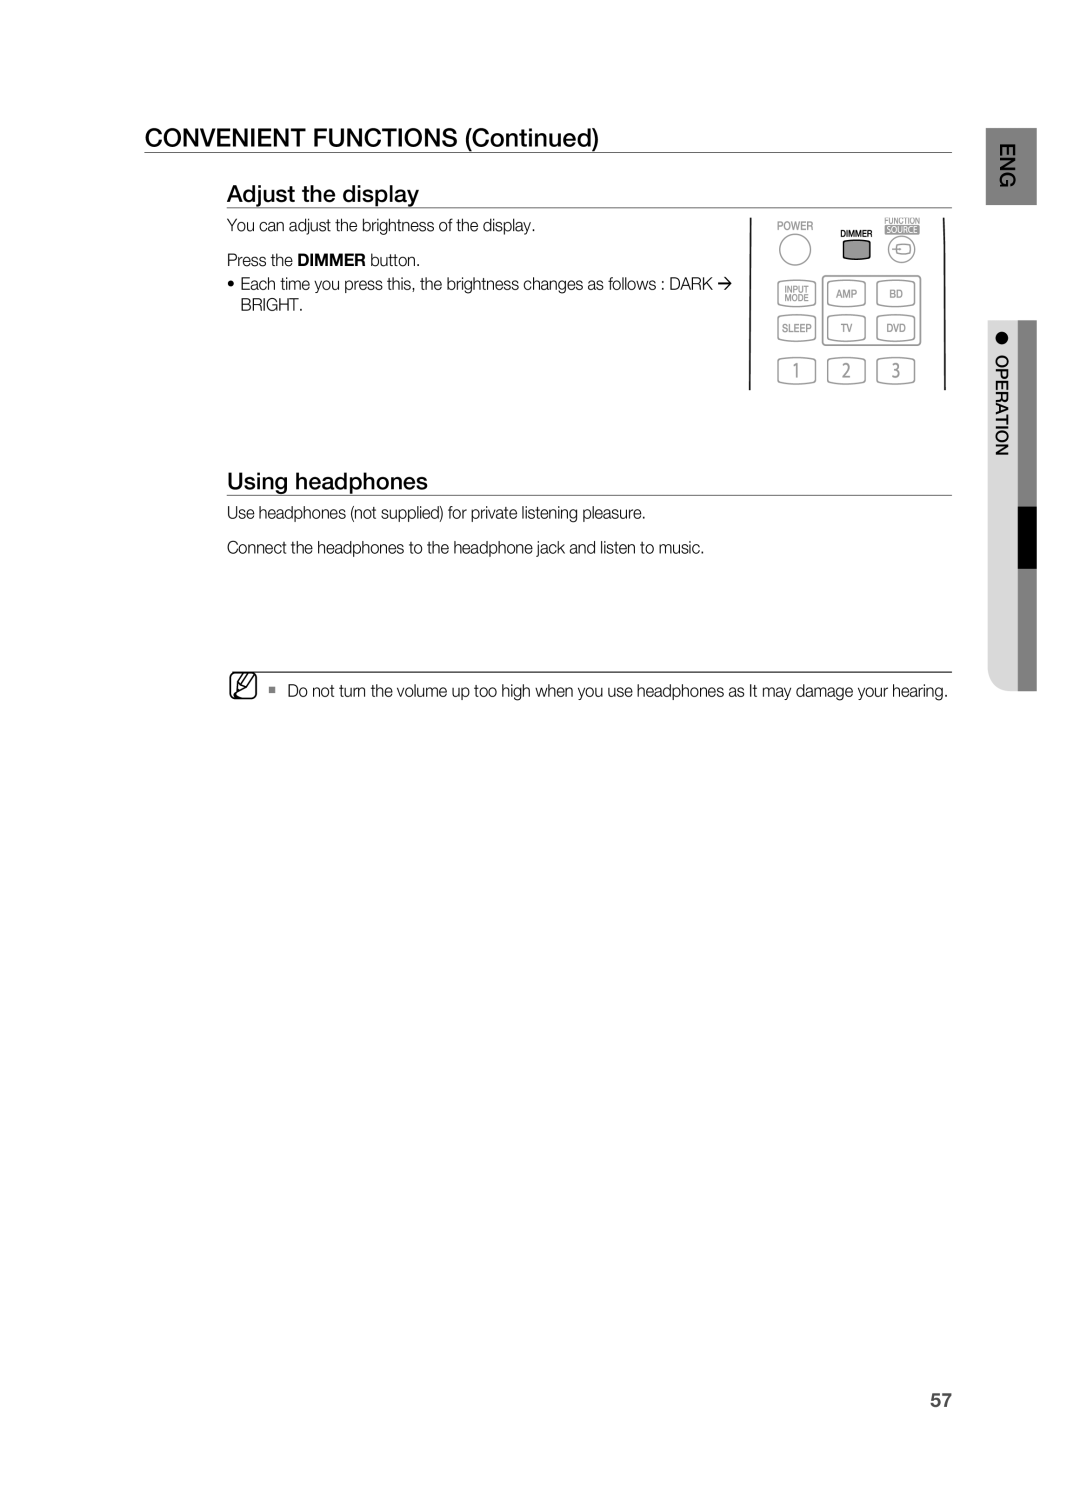 Samsung HT-AS730S user manual Convenient functions Continued, Adjust the display, Using headphones 